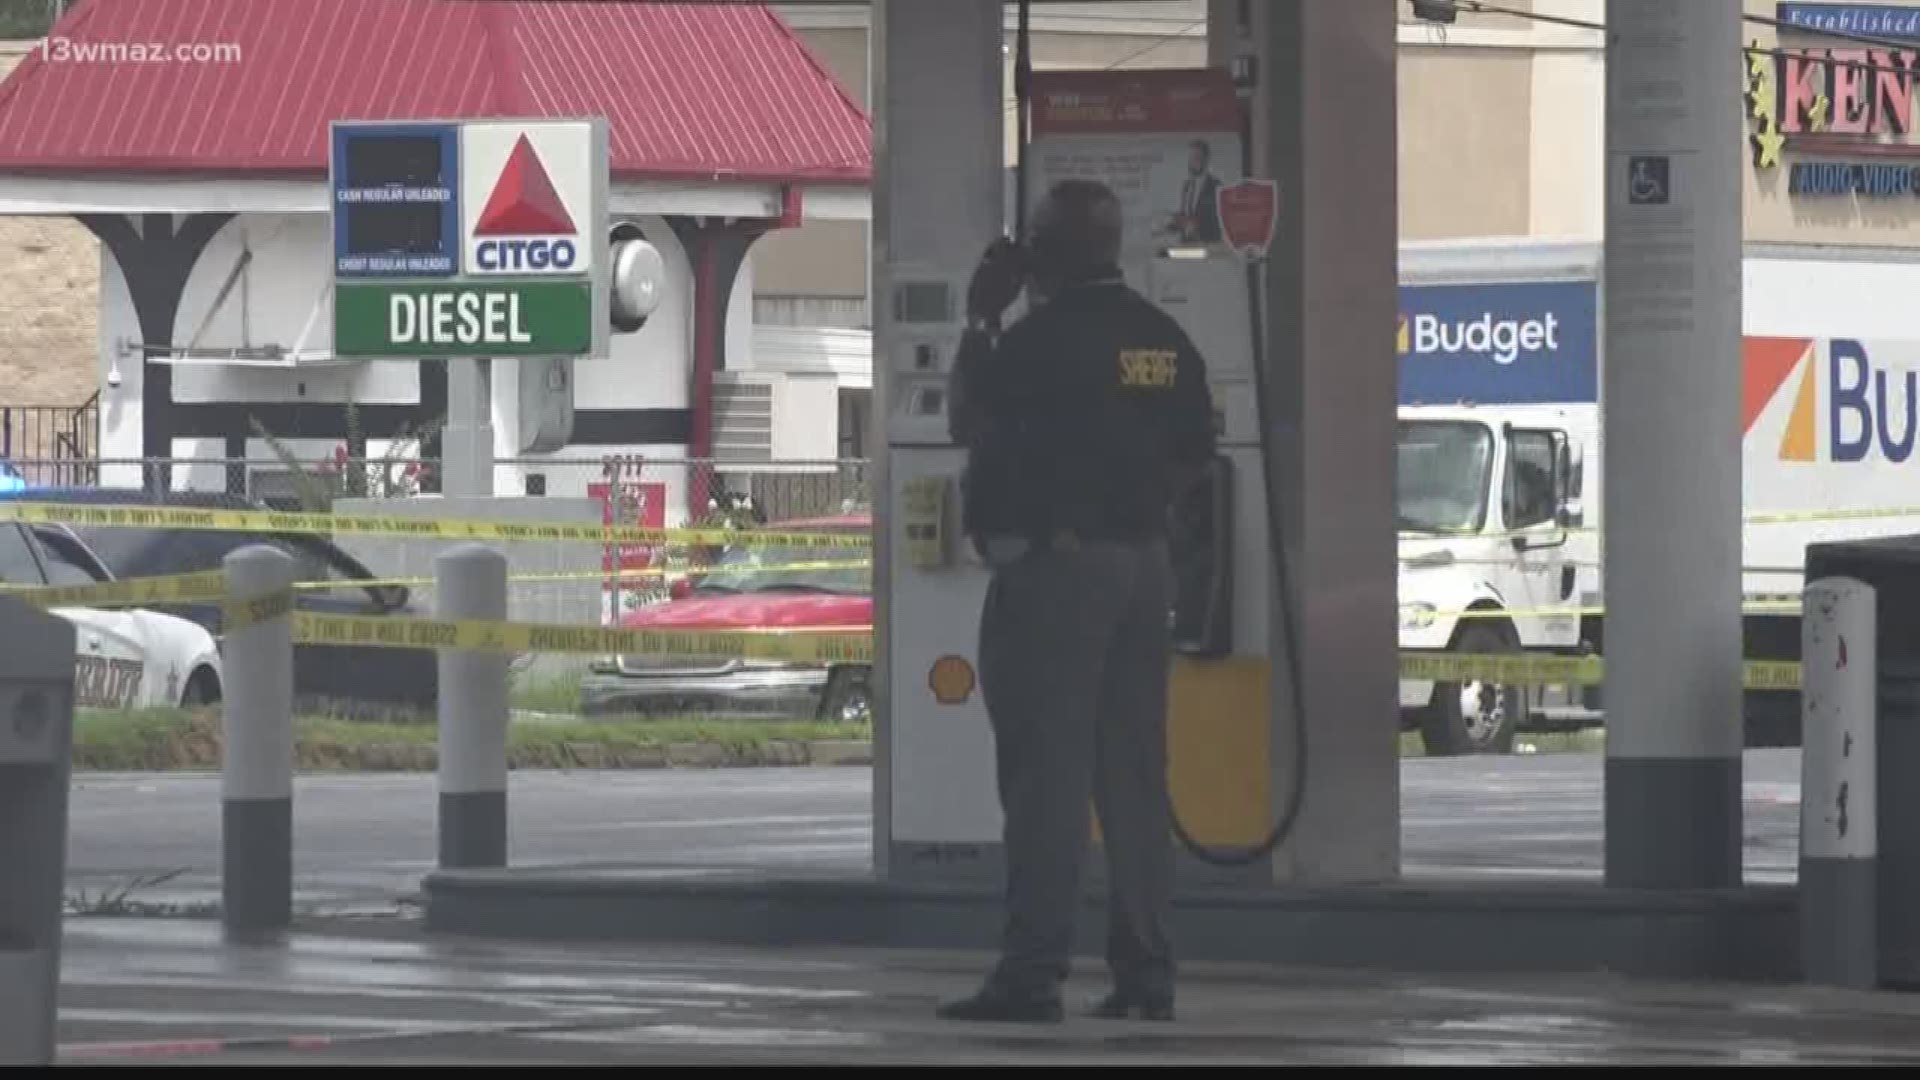 A Macon man died Wednesday afternoon after being shot at a Mercer University Drive gas station. The sheriff's office said 20-year-old Randon Hogan was shot at the Shell Station near the Macon Mall.